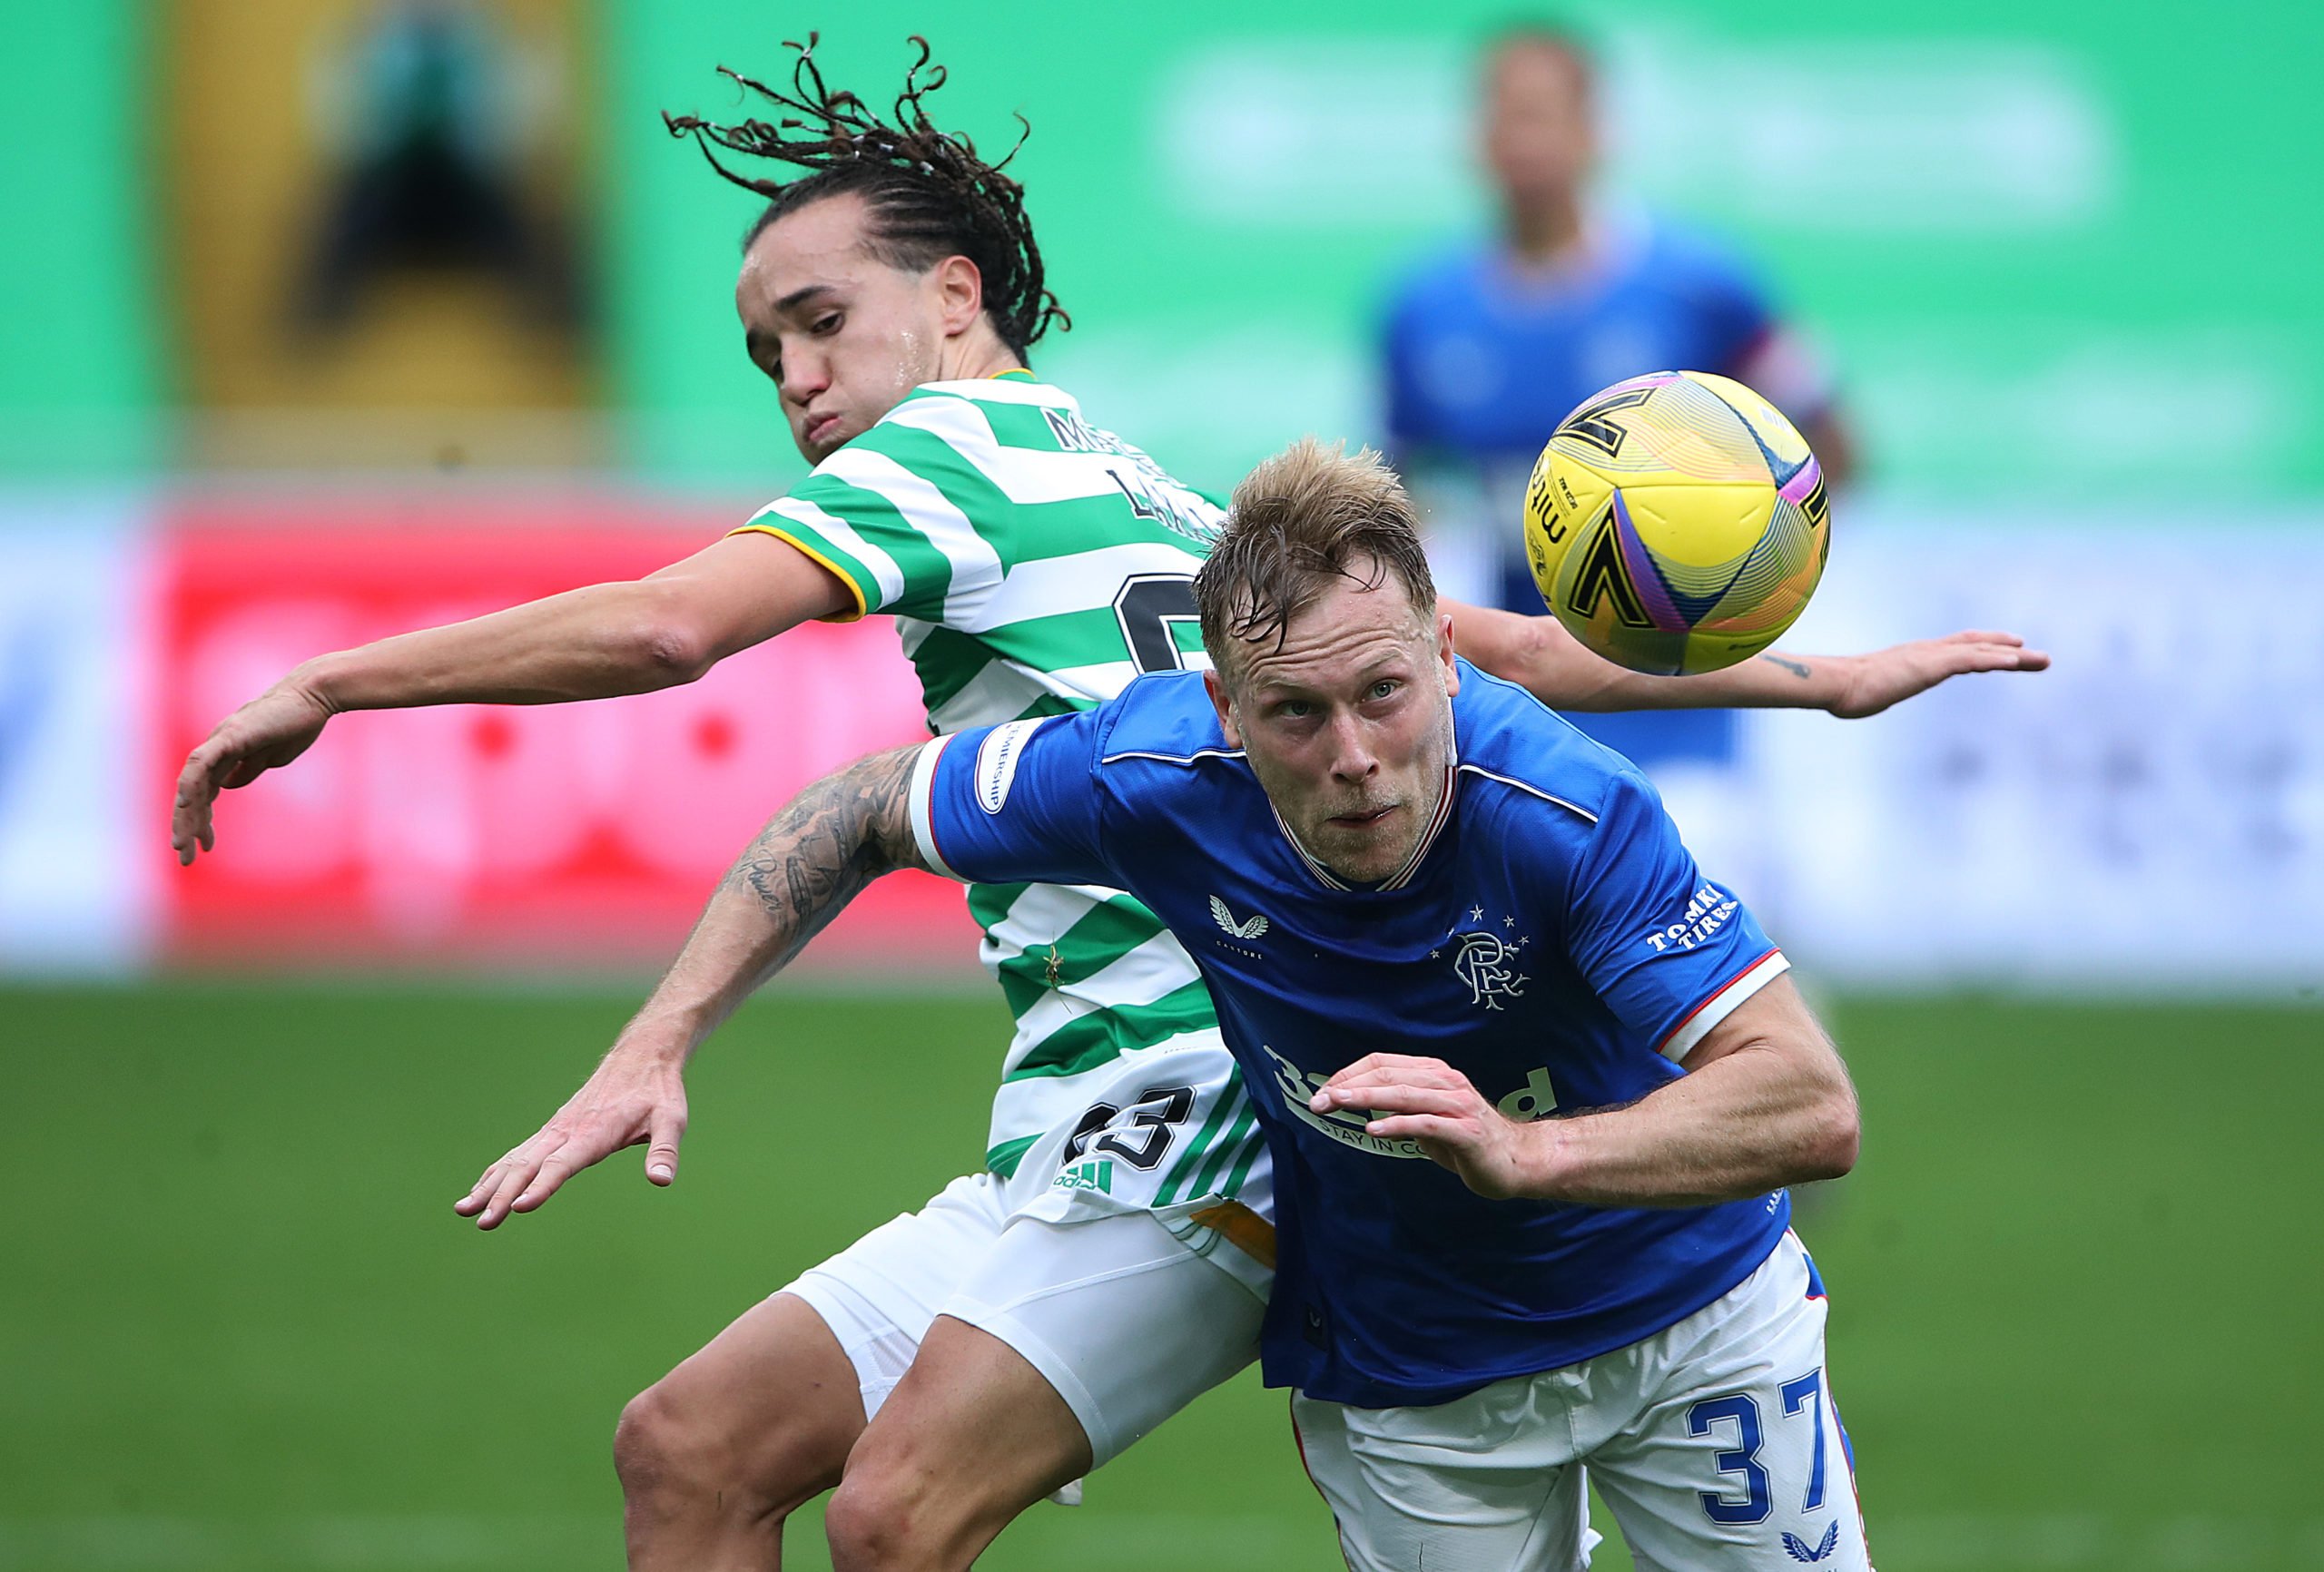 Diego Laxalt in action against Rangers